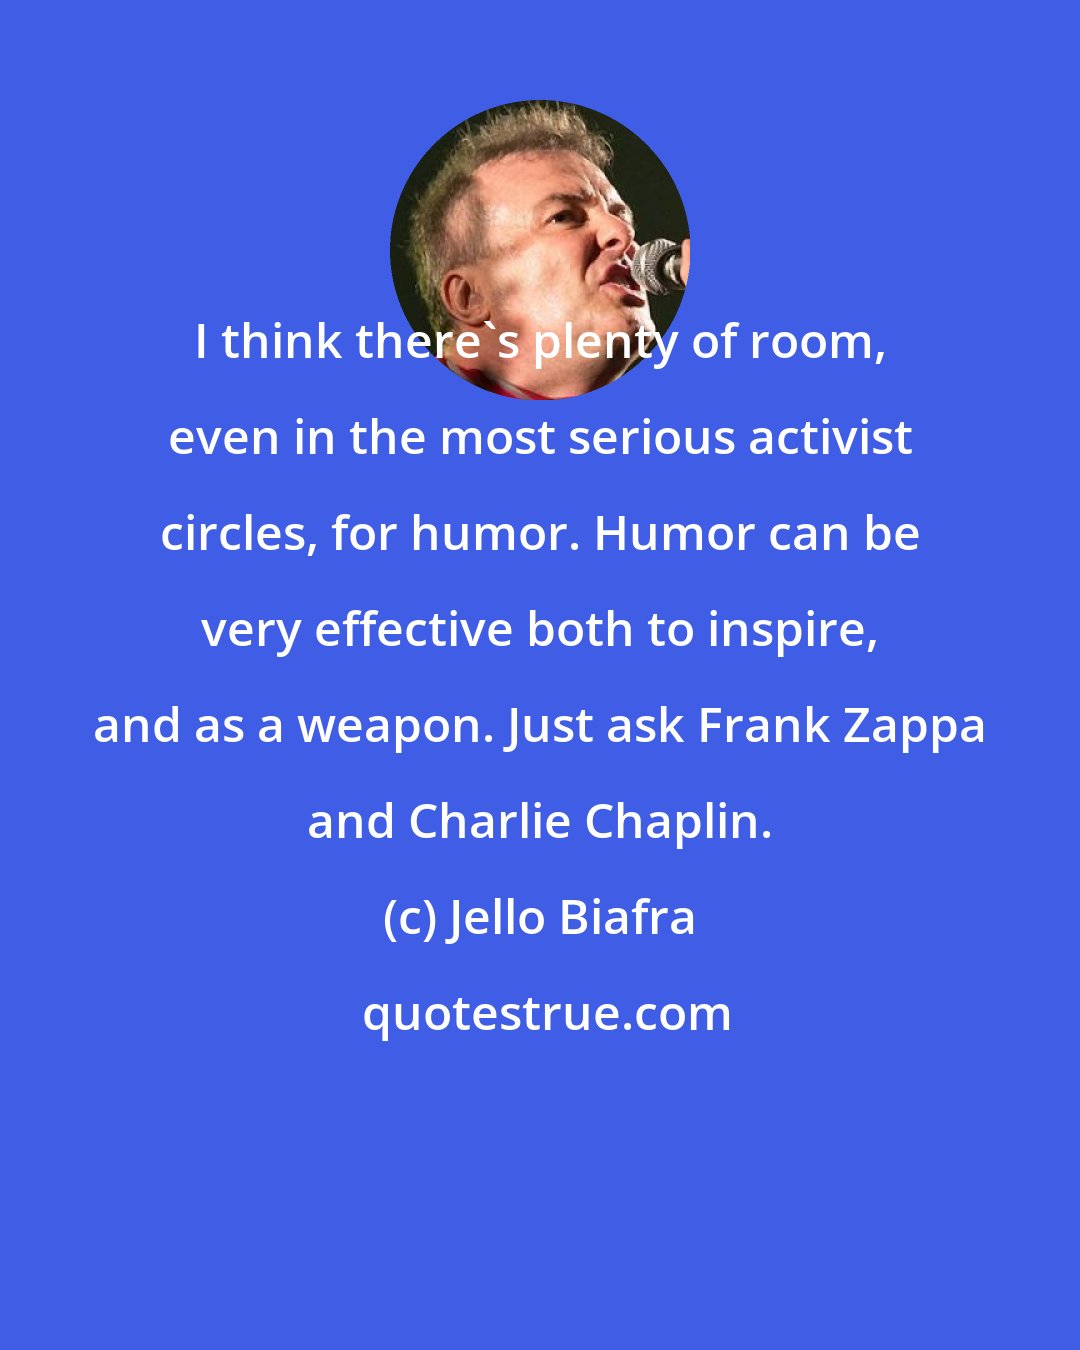 Jello Biafra: I think there's plenty of room, even in the most serious activist circles, for humor. Humor can be very effective both to inspire, and as a weapon. Just ask Frank Zappa and Charlie Chaplin.